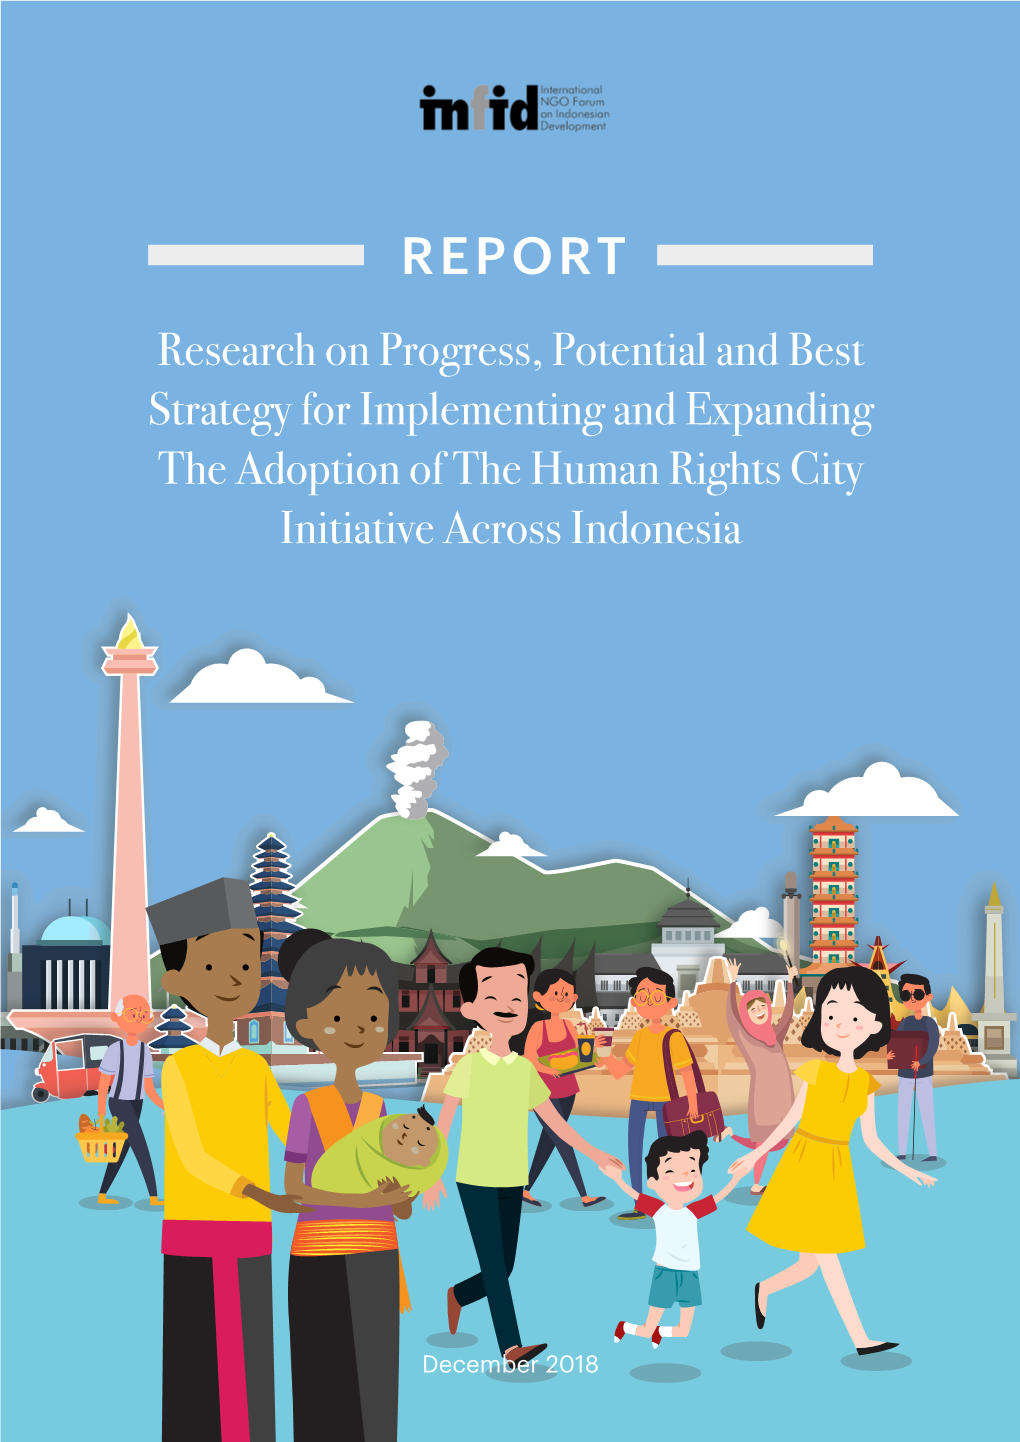 REPORT Research on Progress, Potential and Best Strategy for Implementing and Expanding the Adoption of the Human Rights City Initiative Across Indonesia